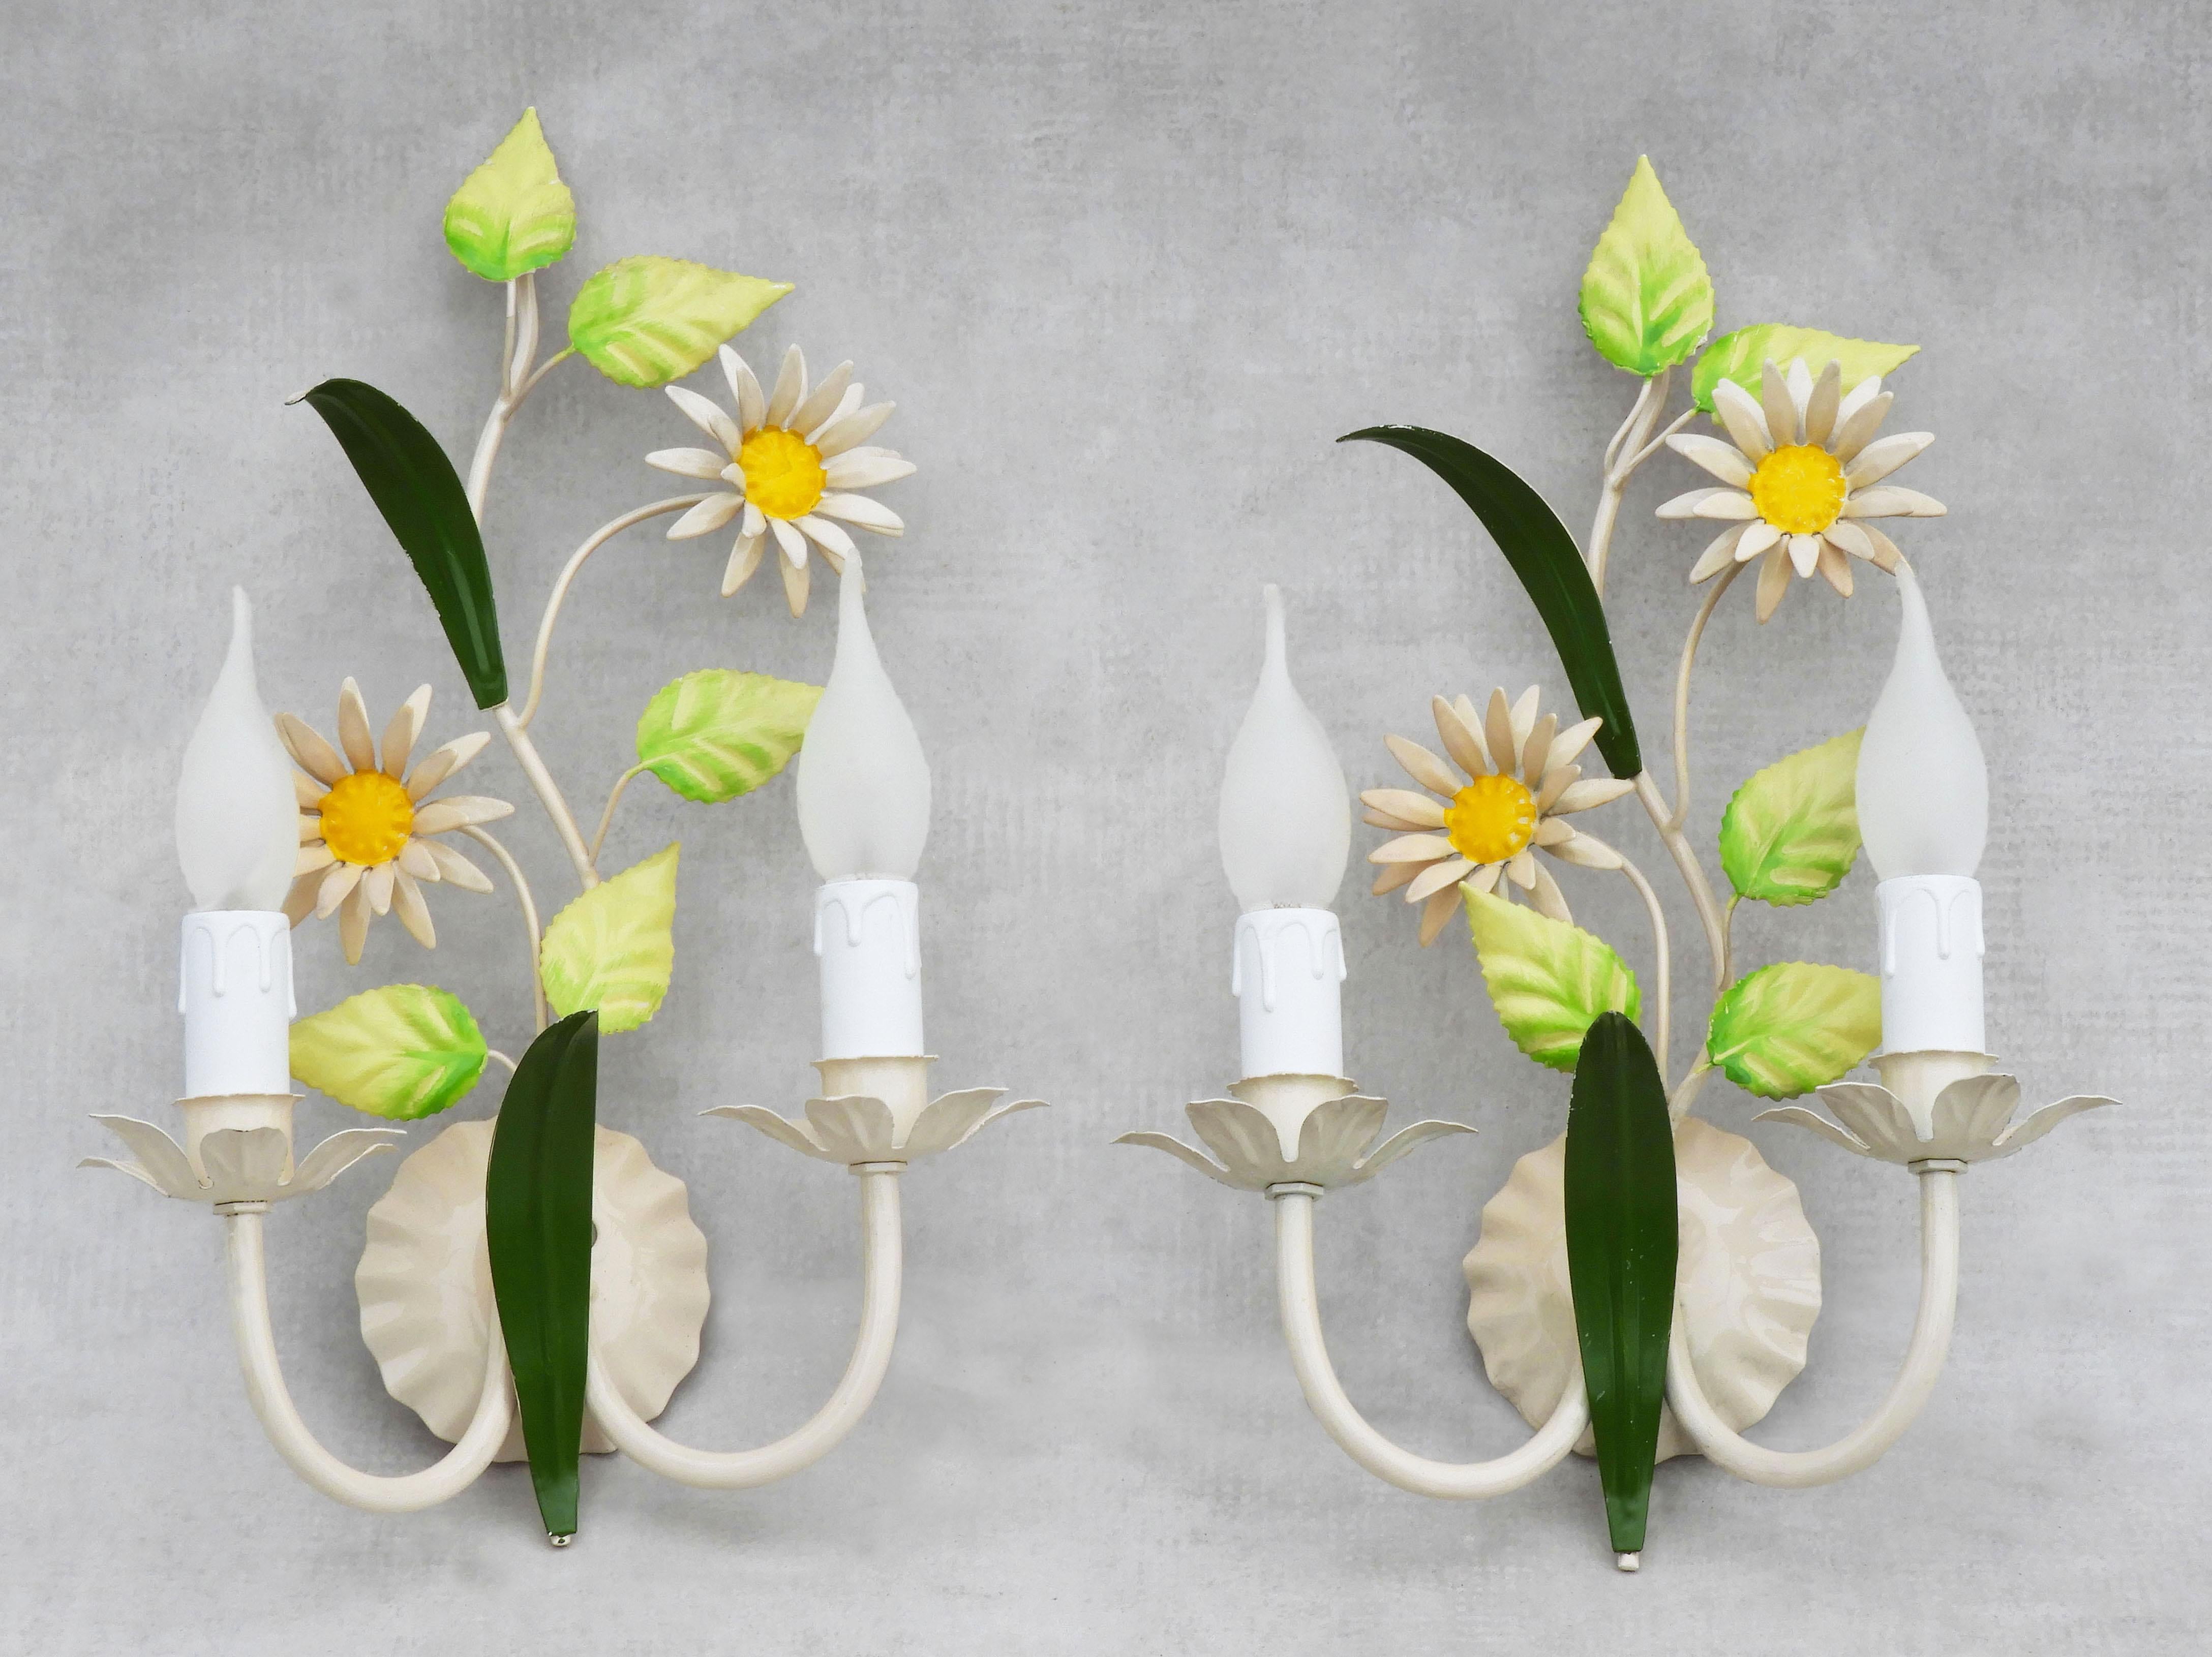 Pair of French Tôle Flower Wall Light Sconces, c1960

A pretty duo pair of mid-century enamelled tôleware wall lights each decorated with Marguerite Daisy blooms, glossy green foliage and two faux candlelights.
In nice vintage condition with good